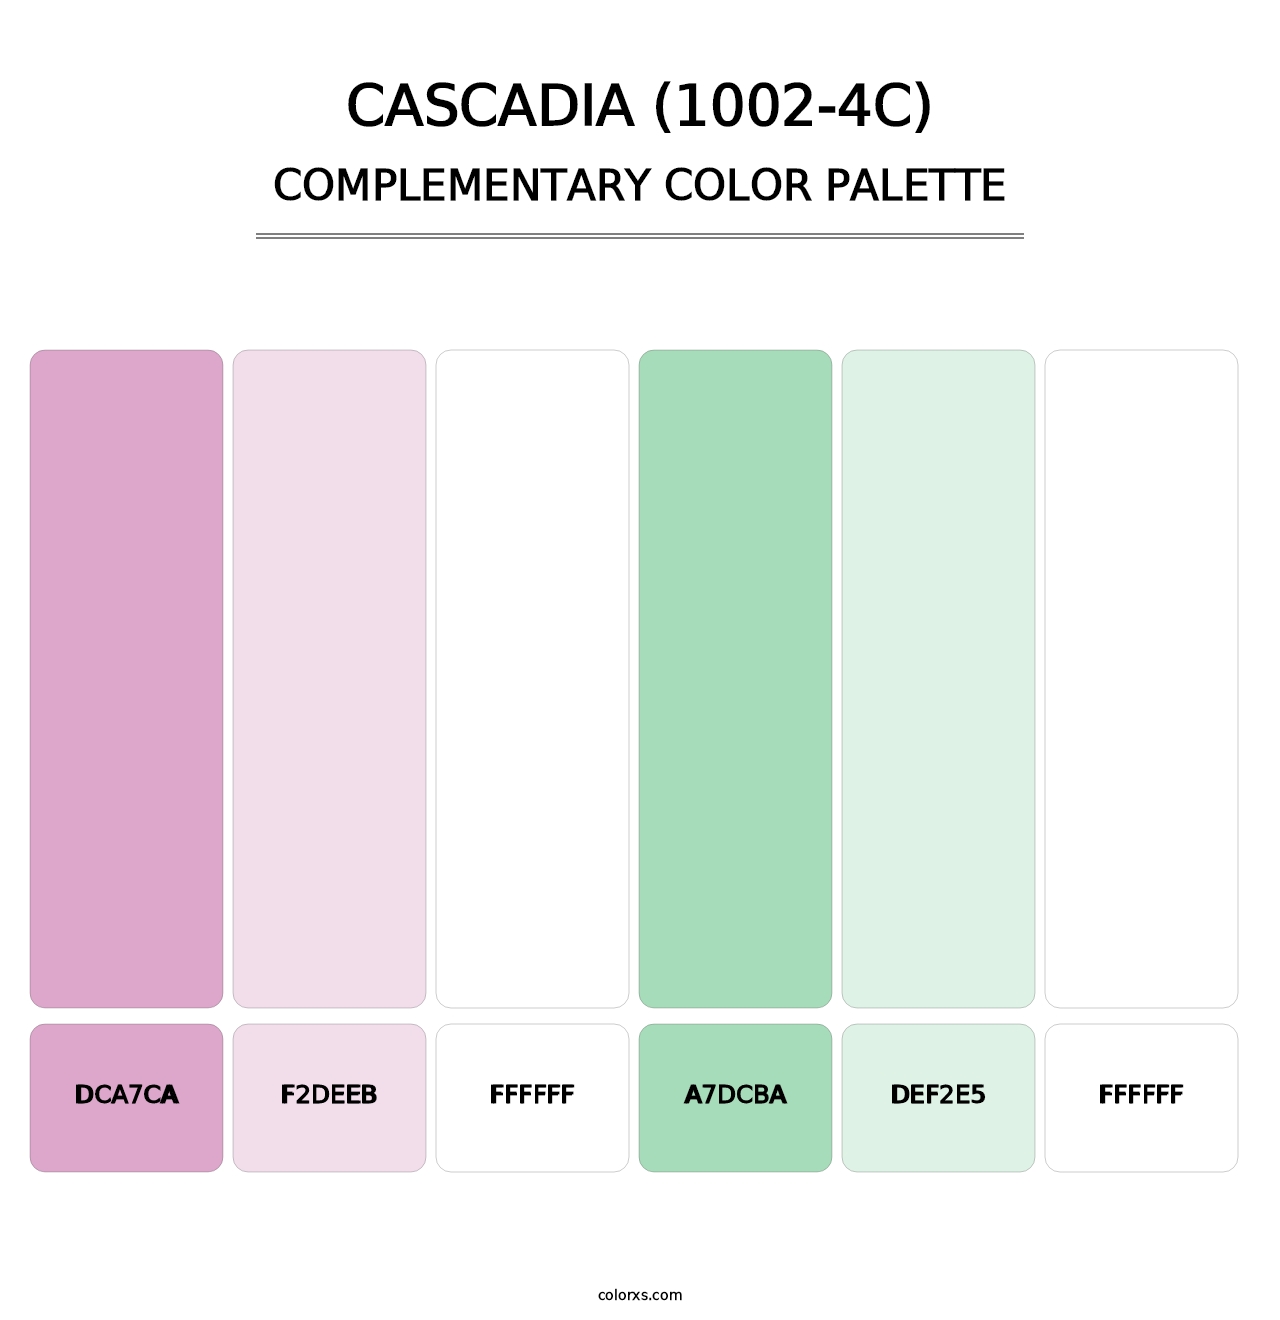 Cascadia (1002-4C) - Complementary Color Palette